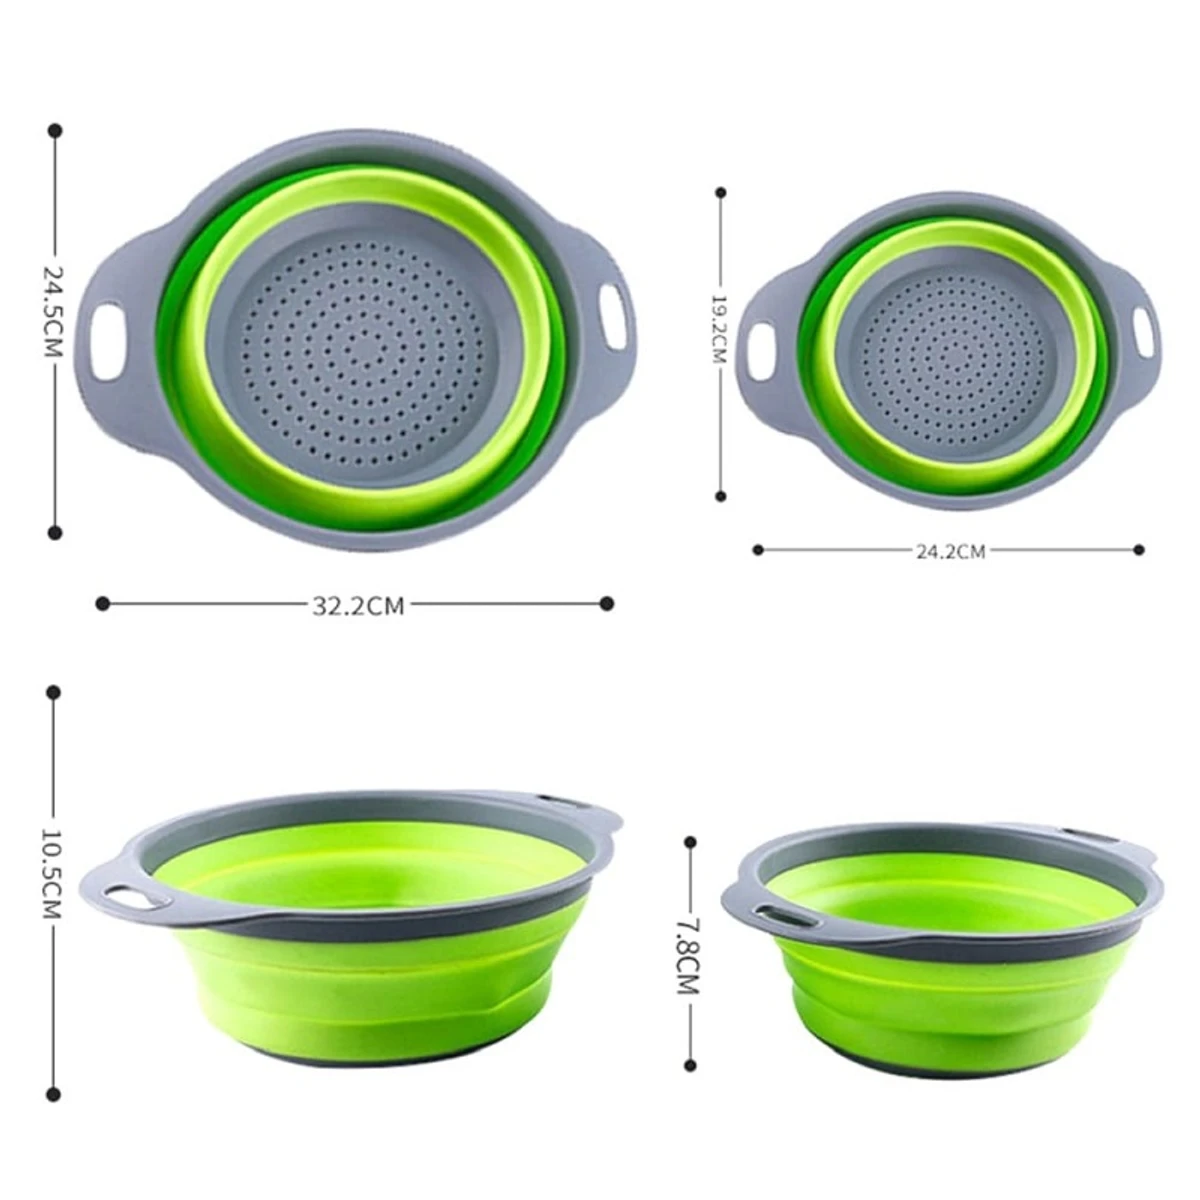 Qualityful Collapsible Filter Basket - Multicolor